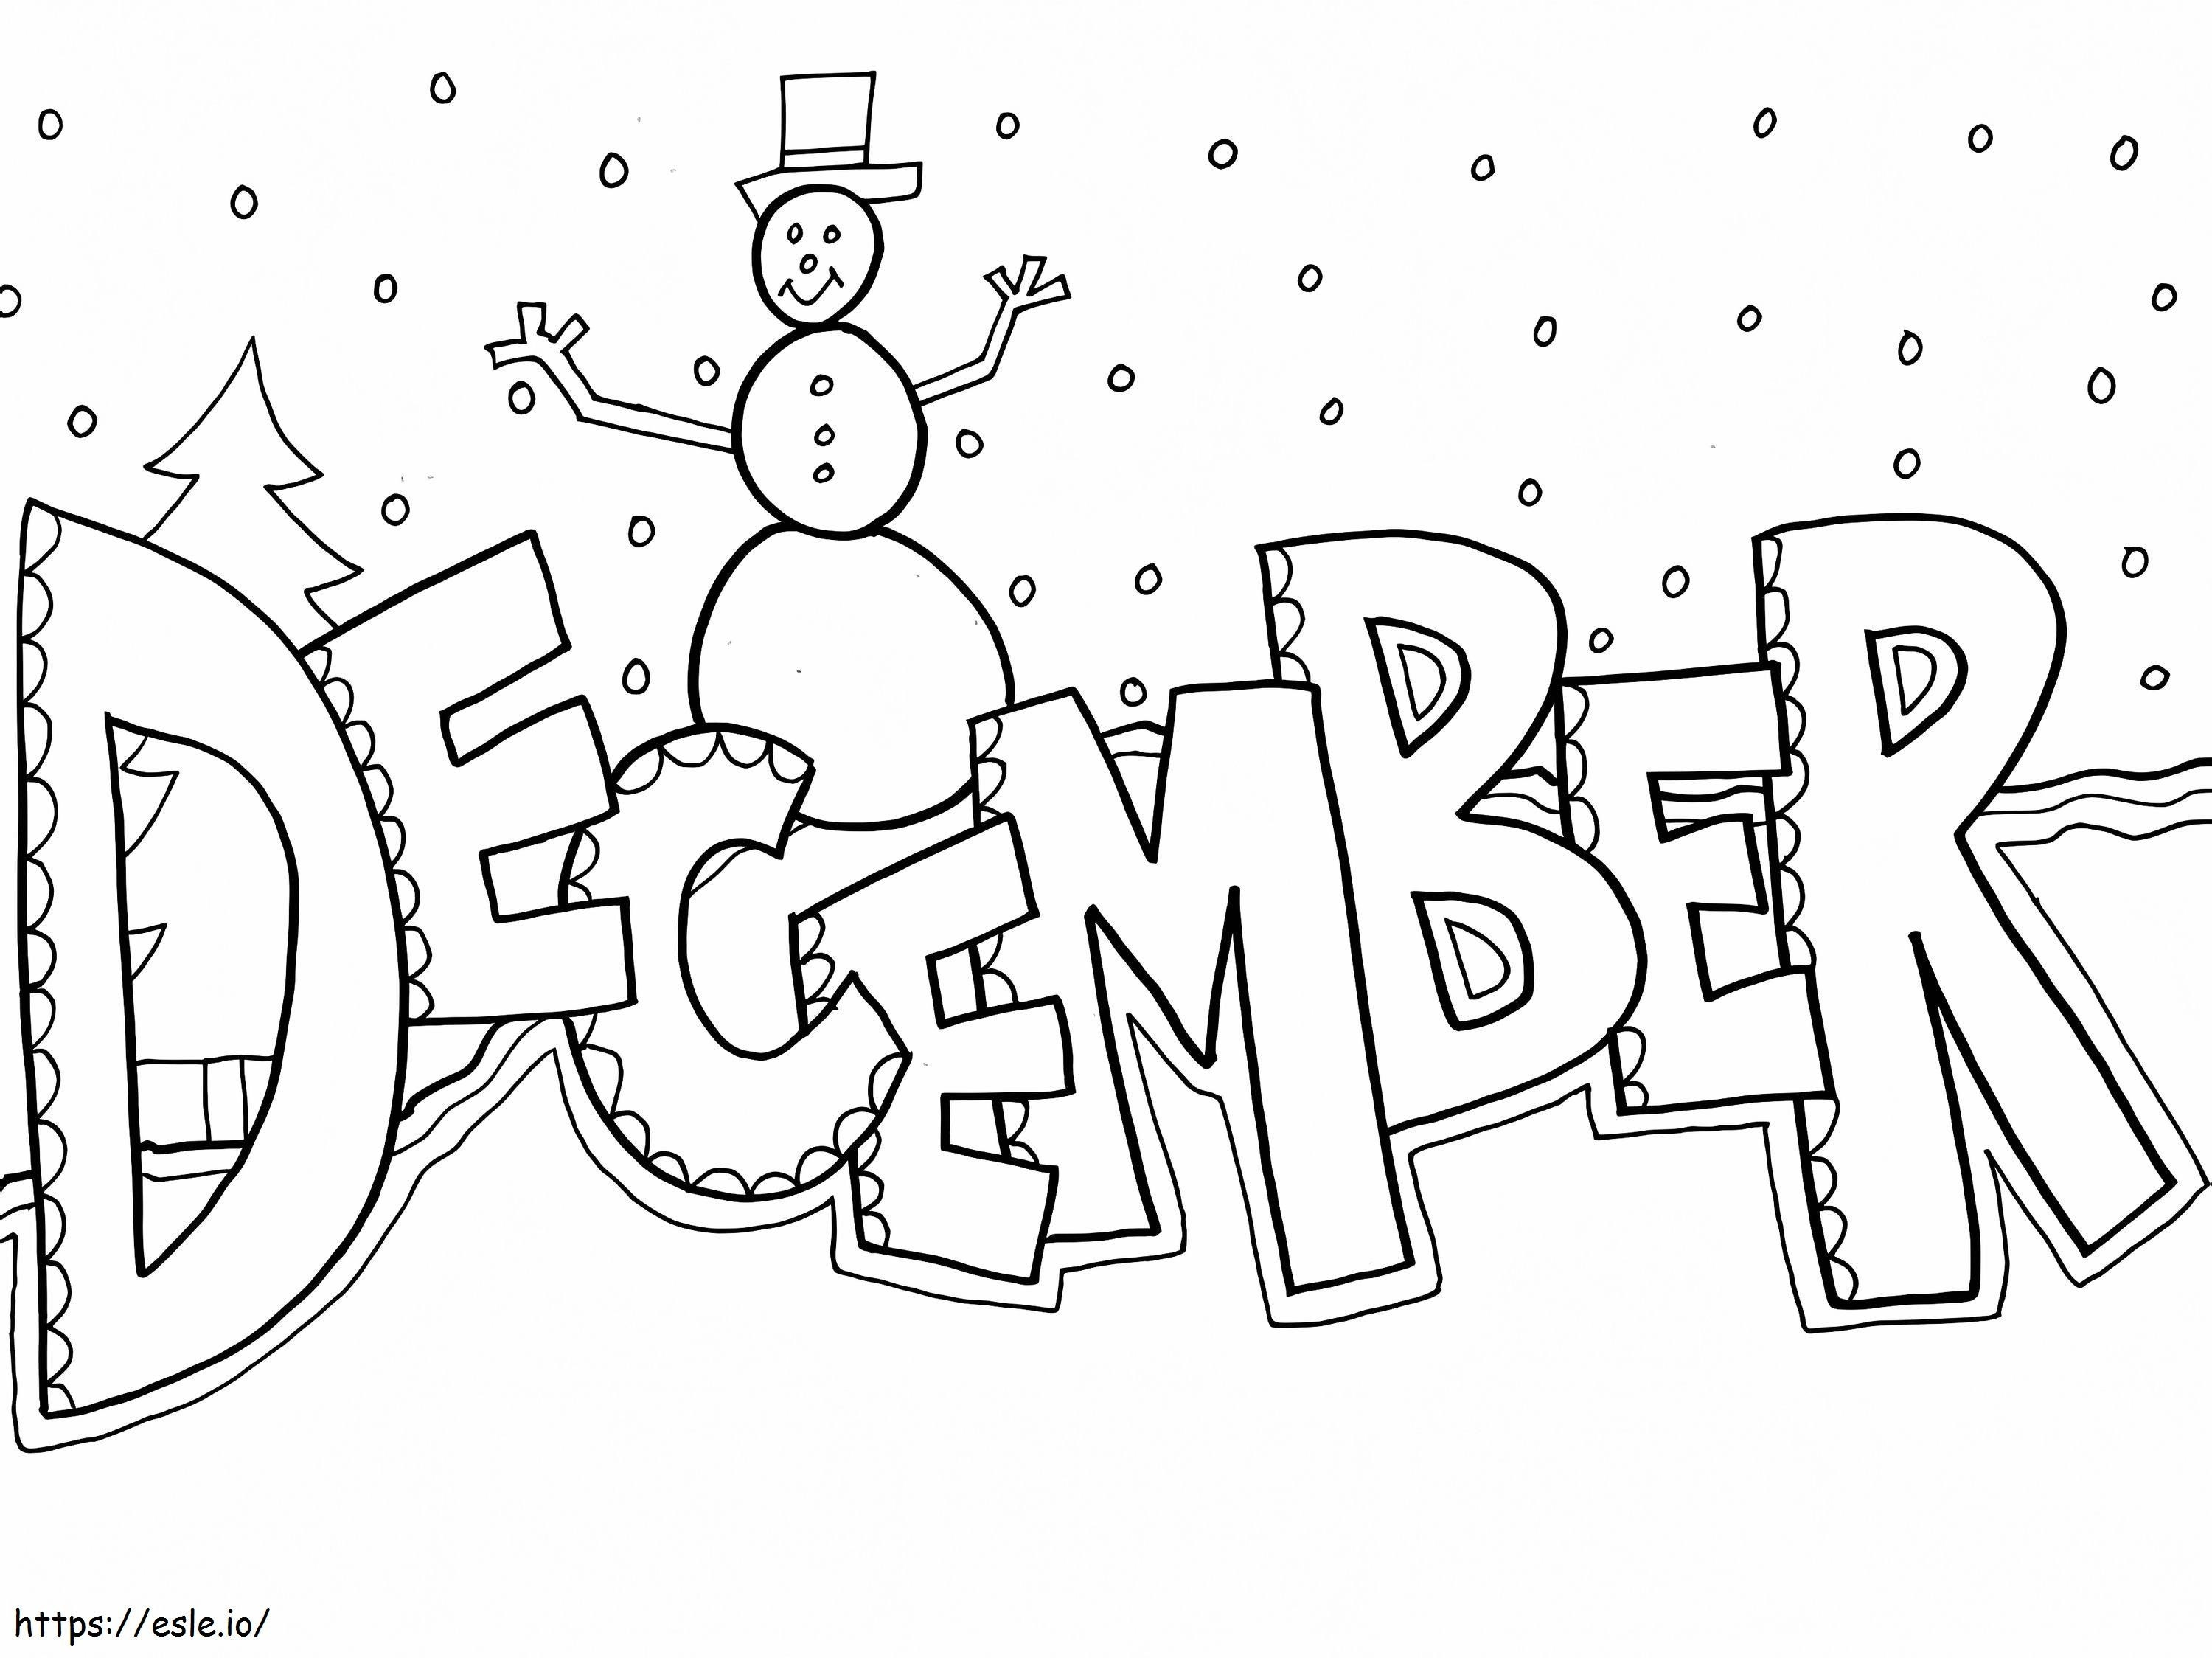 Welcome December coloring page